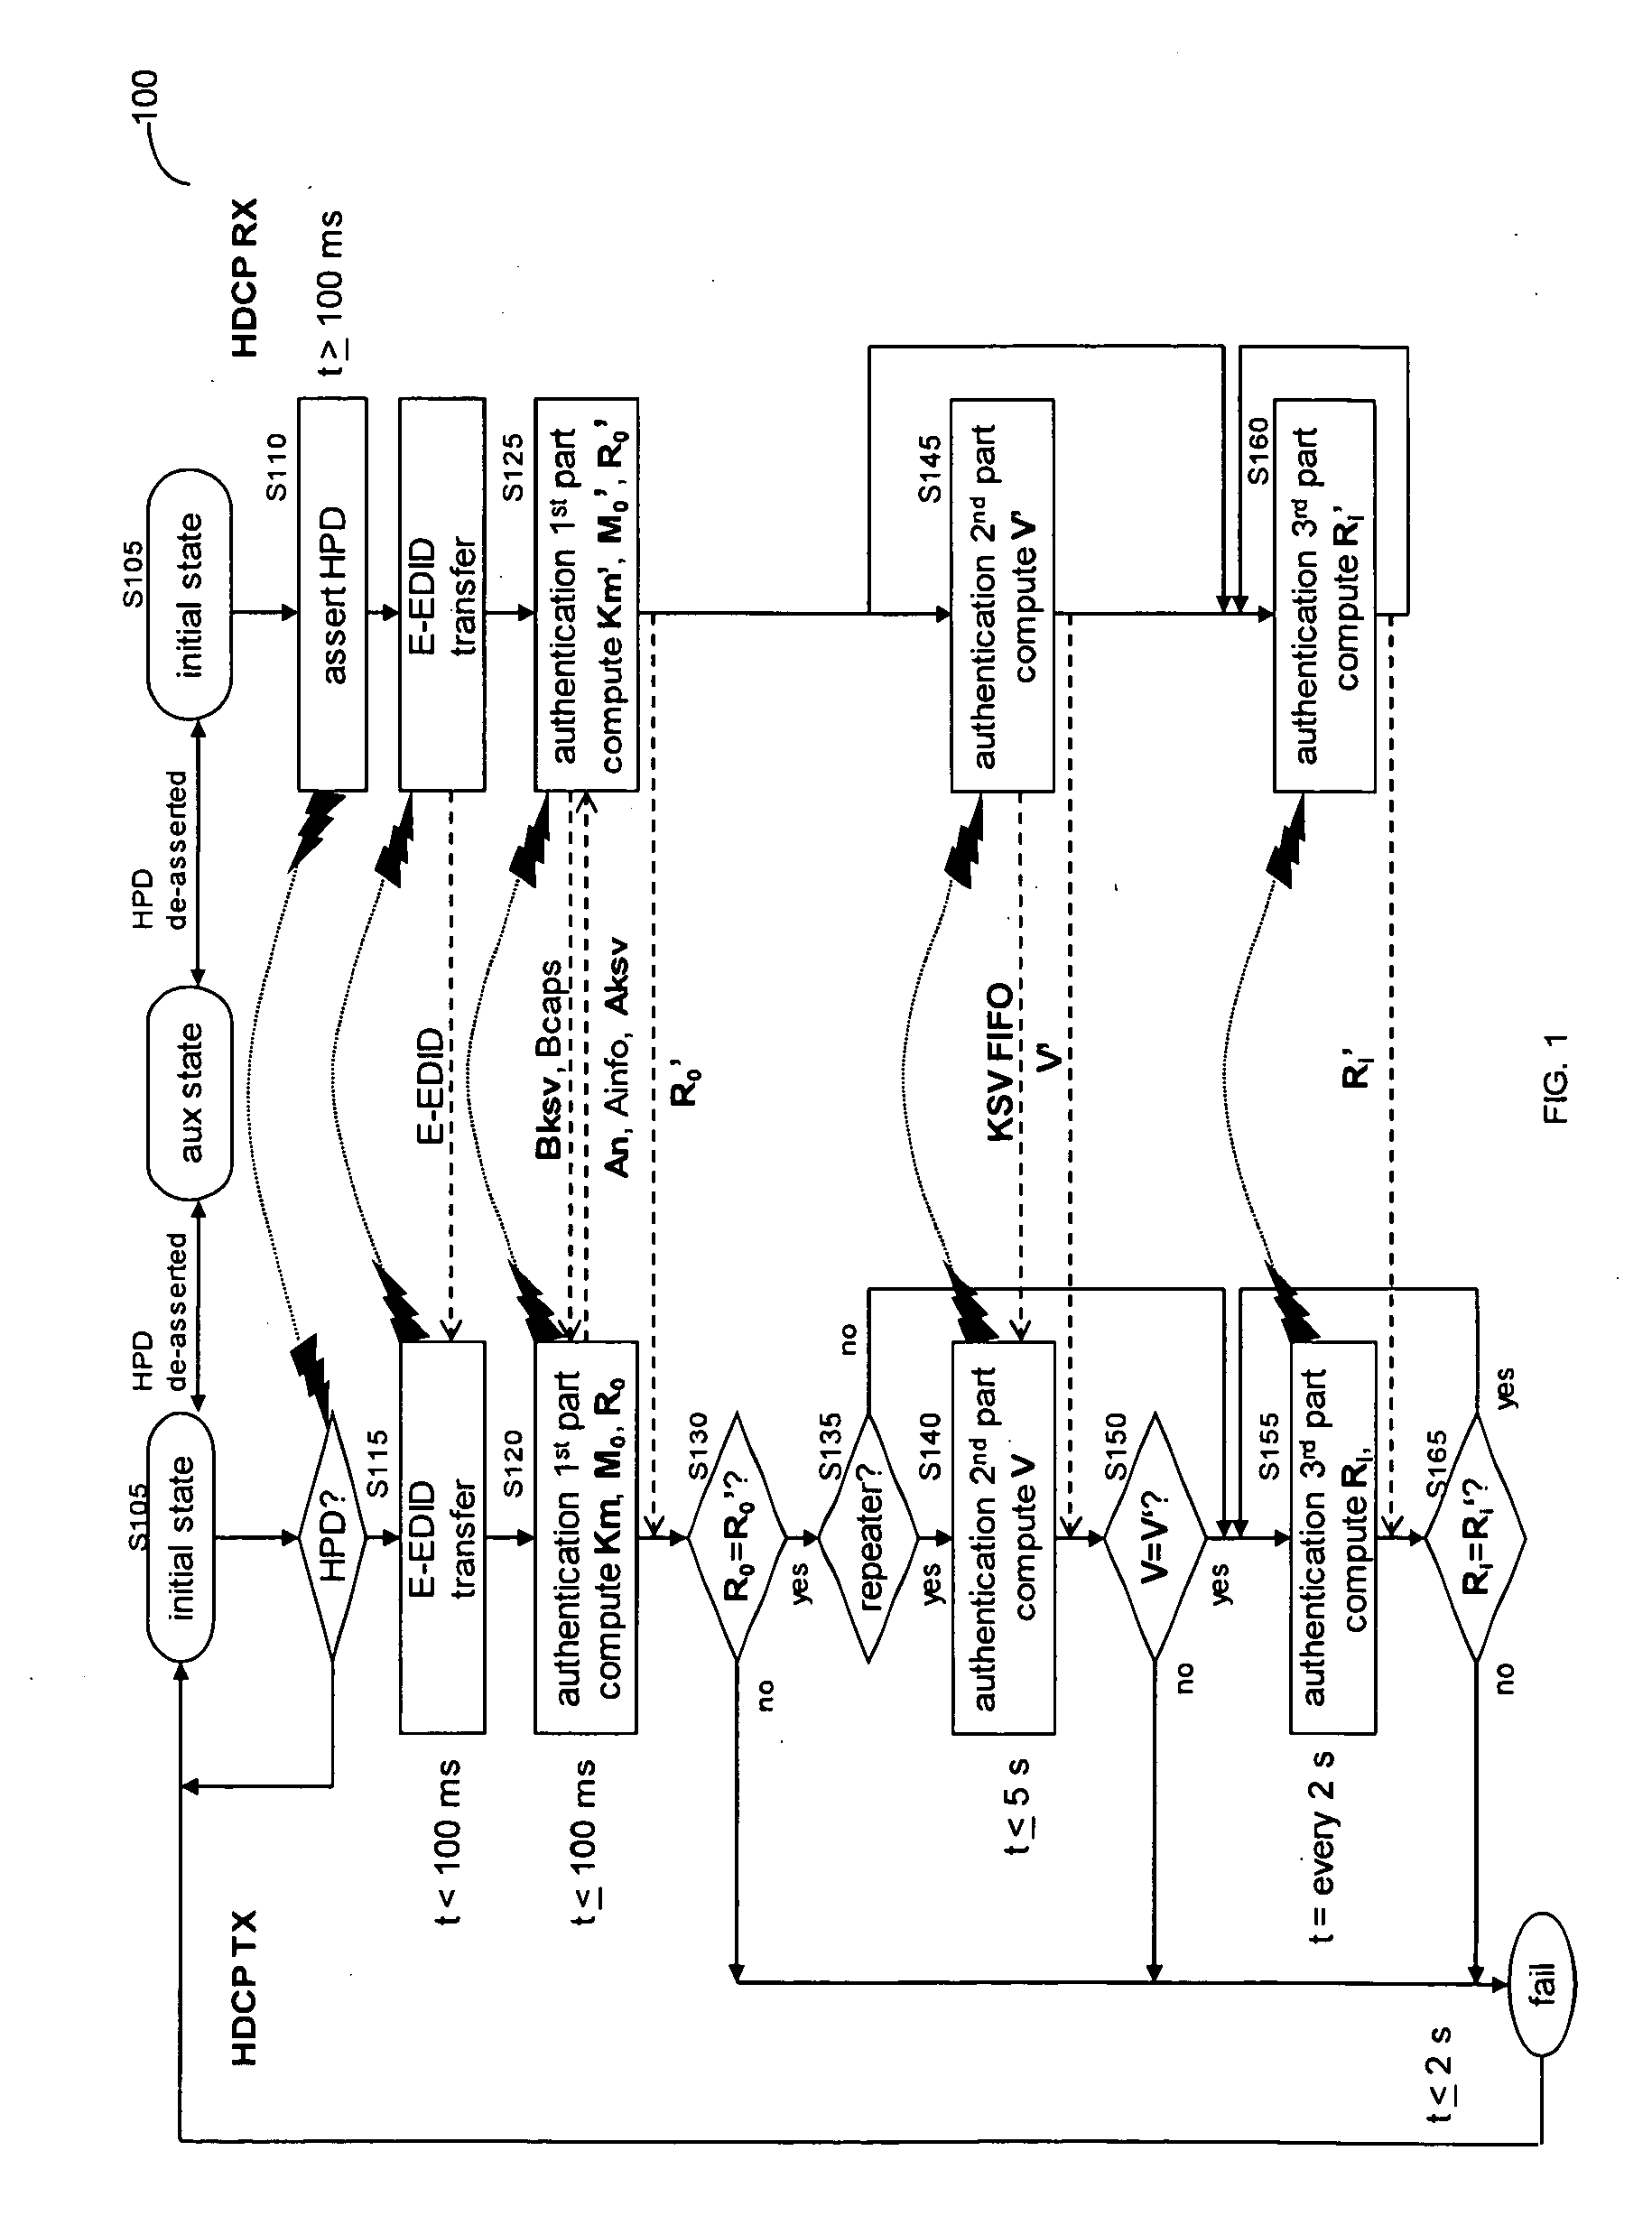 Method and Apparatus for Fast Switching Between Source Multimedia Devices